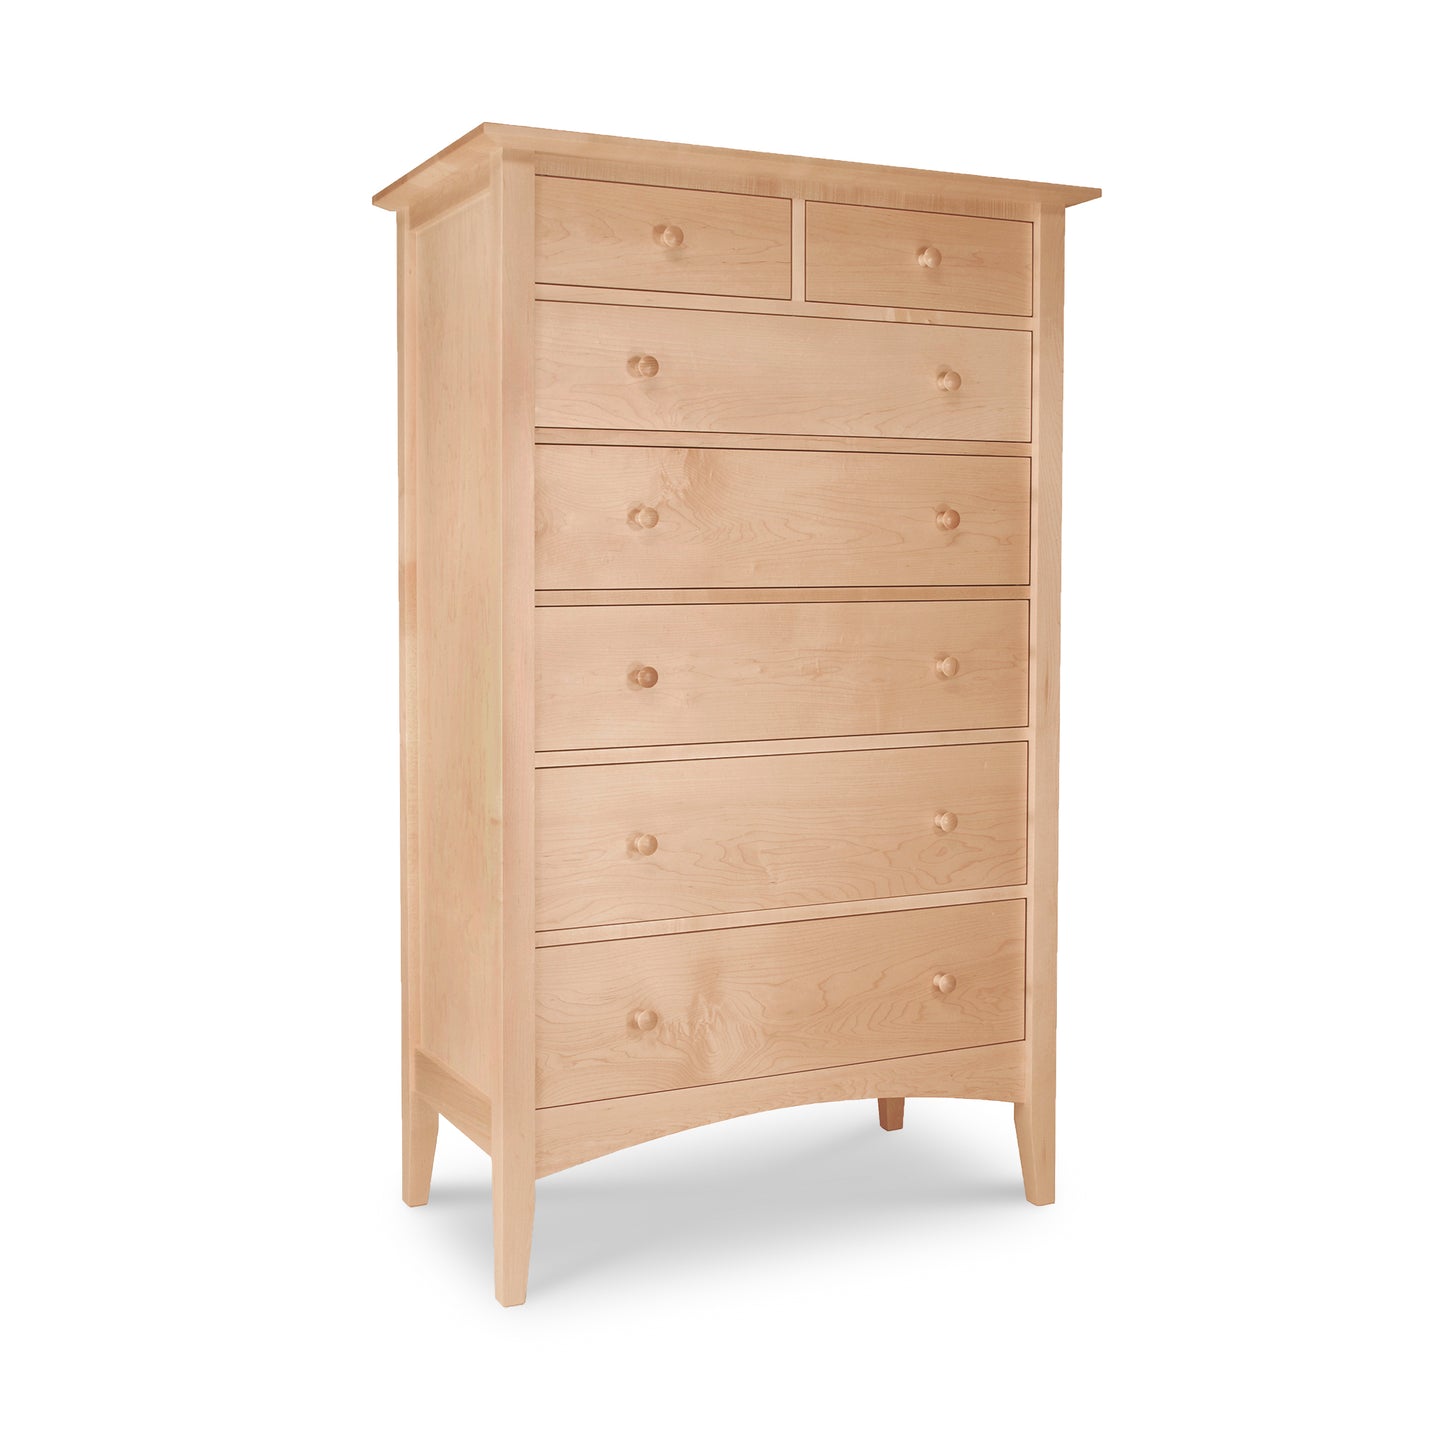 A Maple Corner Woodworks American Shaker 7-Drawer Chest on a white background featuring eco-friendly finishes.